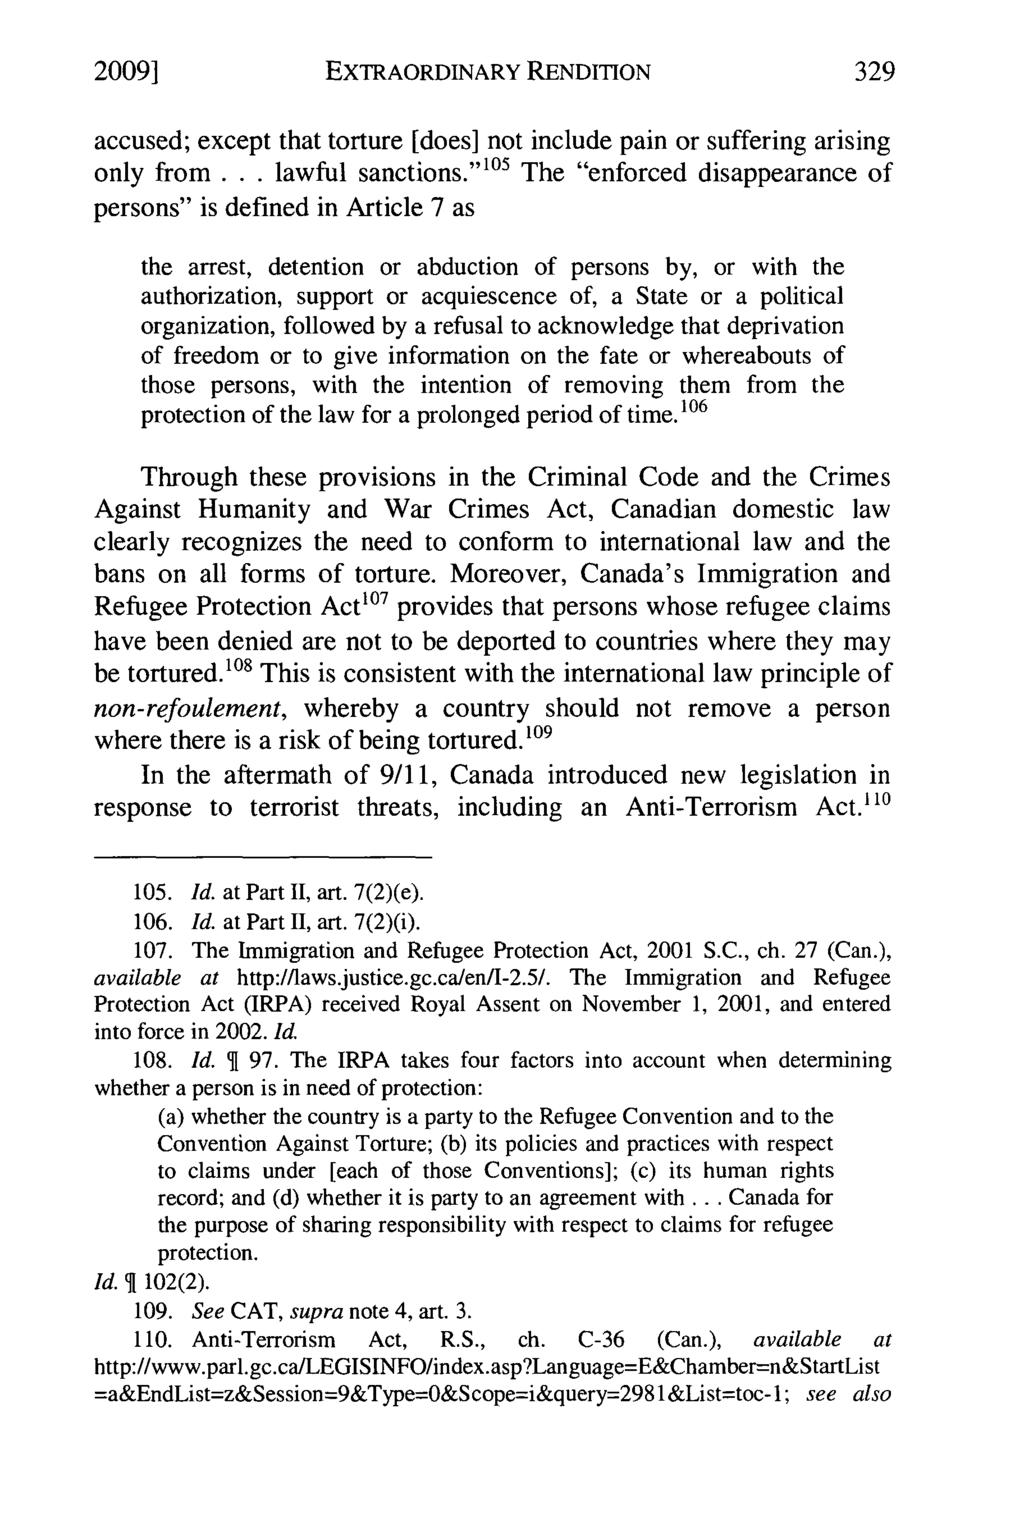 2009] Silva: Extraordinary Rendition: A Challenge to Canadian and United State EXTRAORDINARY RENDITION accused; except that torture [does] not include pain or suffering arising only from.